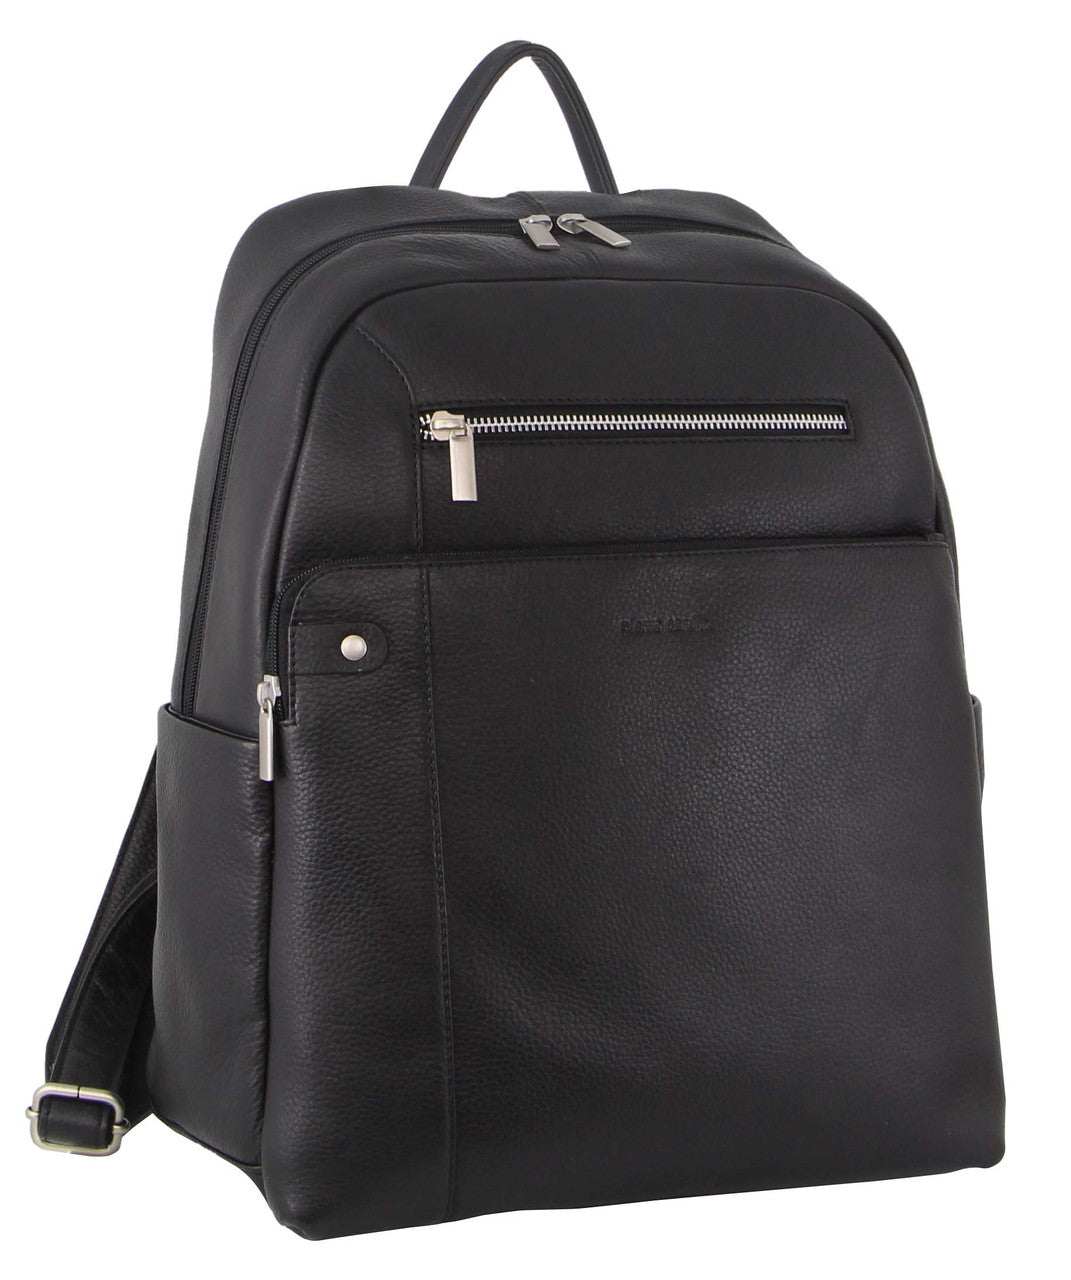 Pierre Cardin Leather Business Laptop Backpack PC3341 Black-1